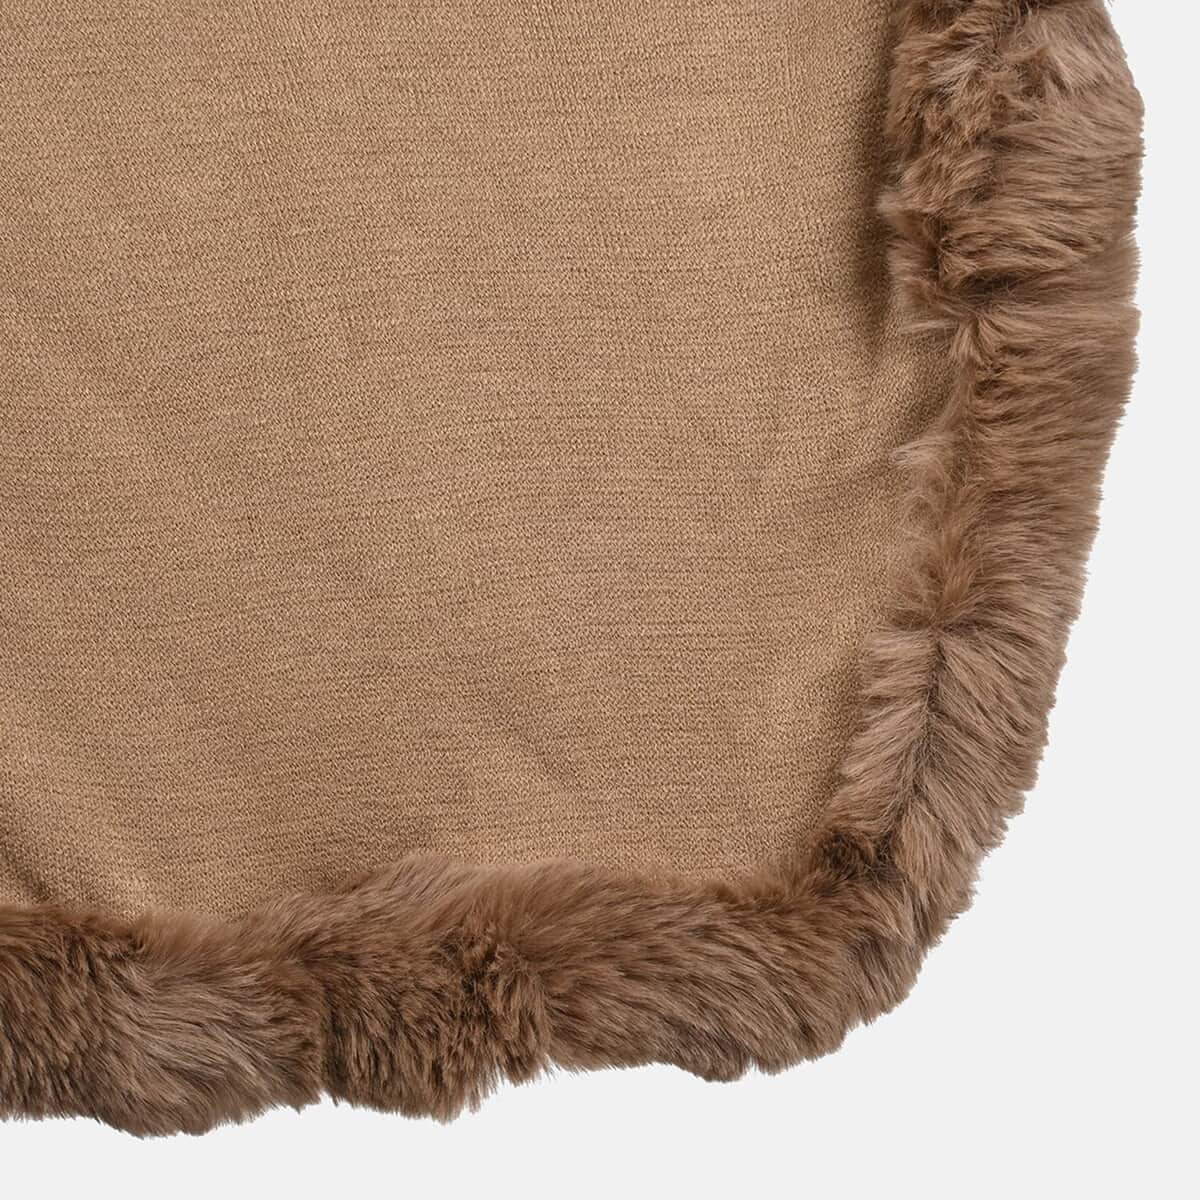 PASSAGE Beige Ruana with Faux Fur Trim - One Size Fits Most (31.5"x45.5") image number 4